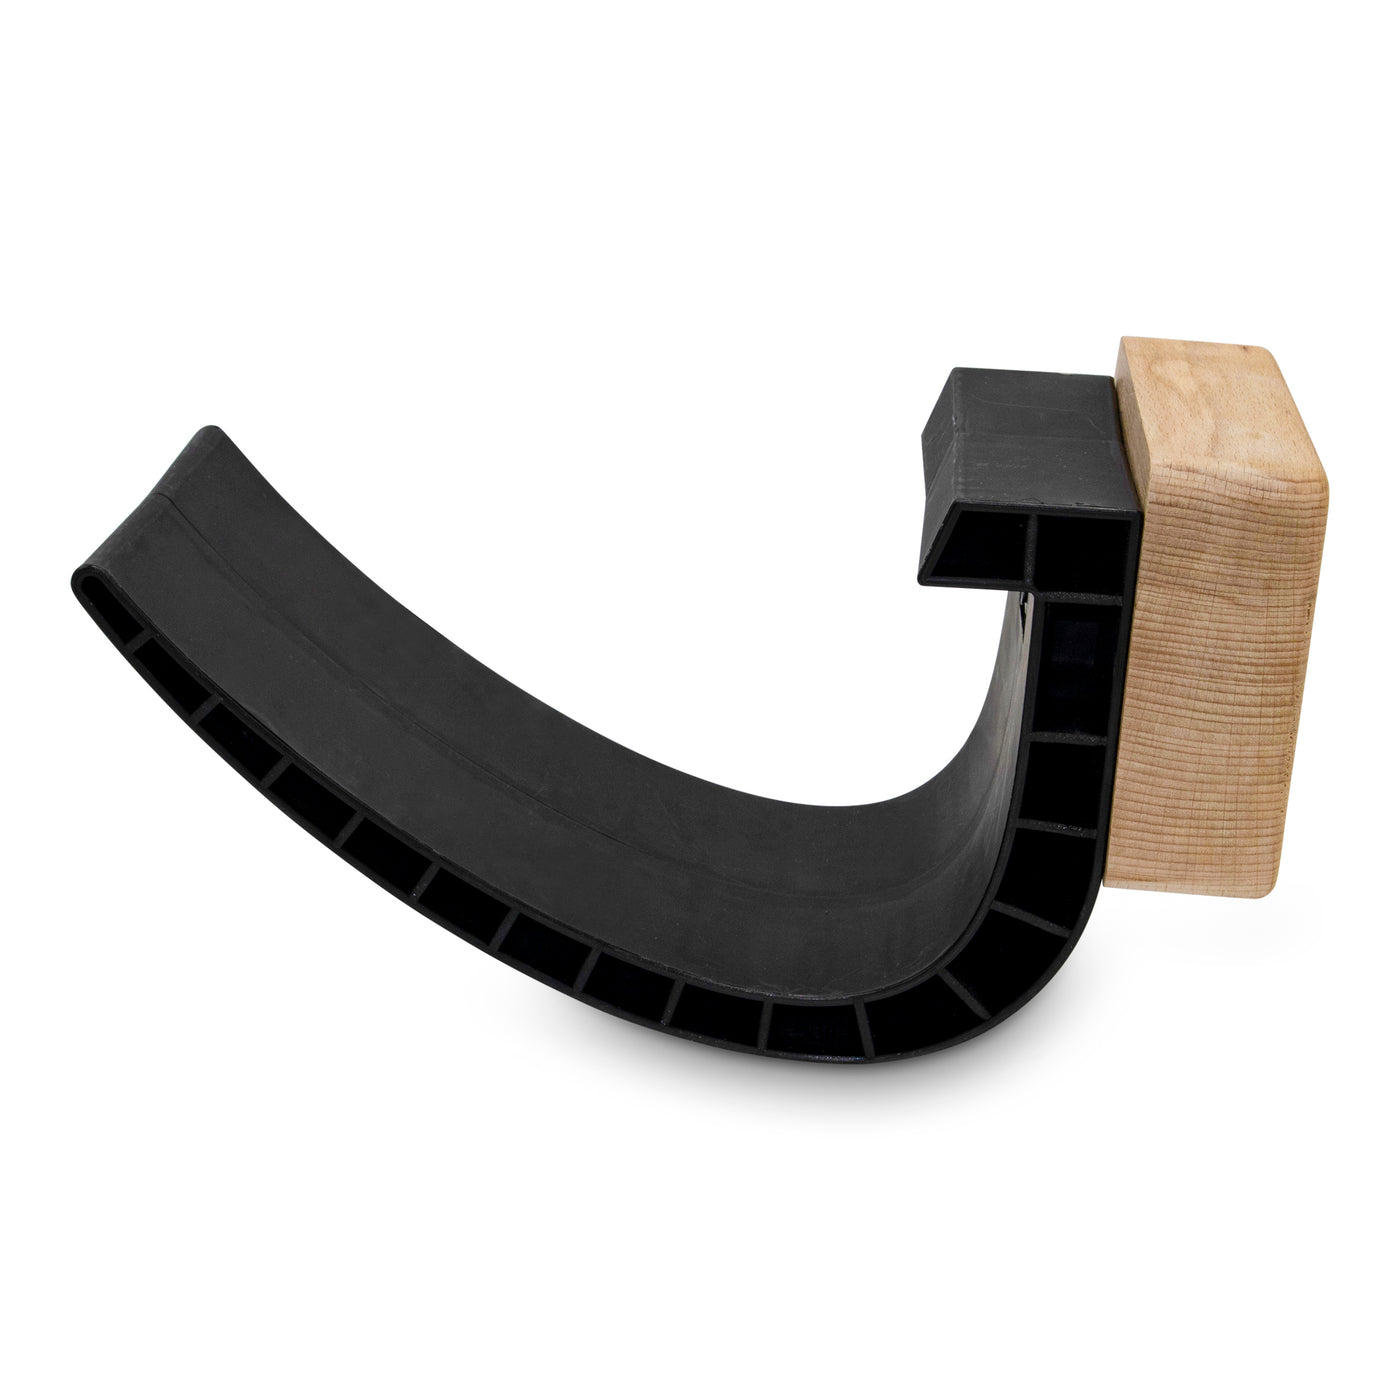 Wooden Rock Climbing Holds - Blocks with Slots